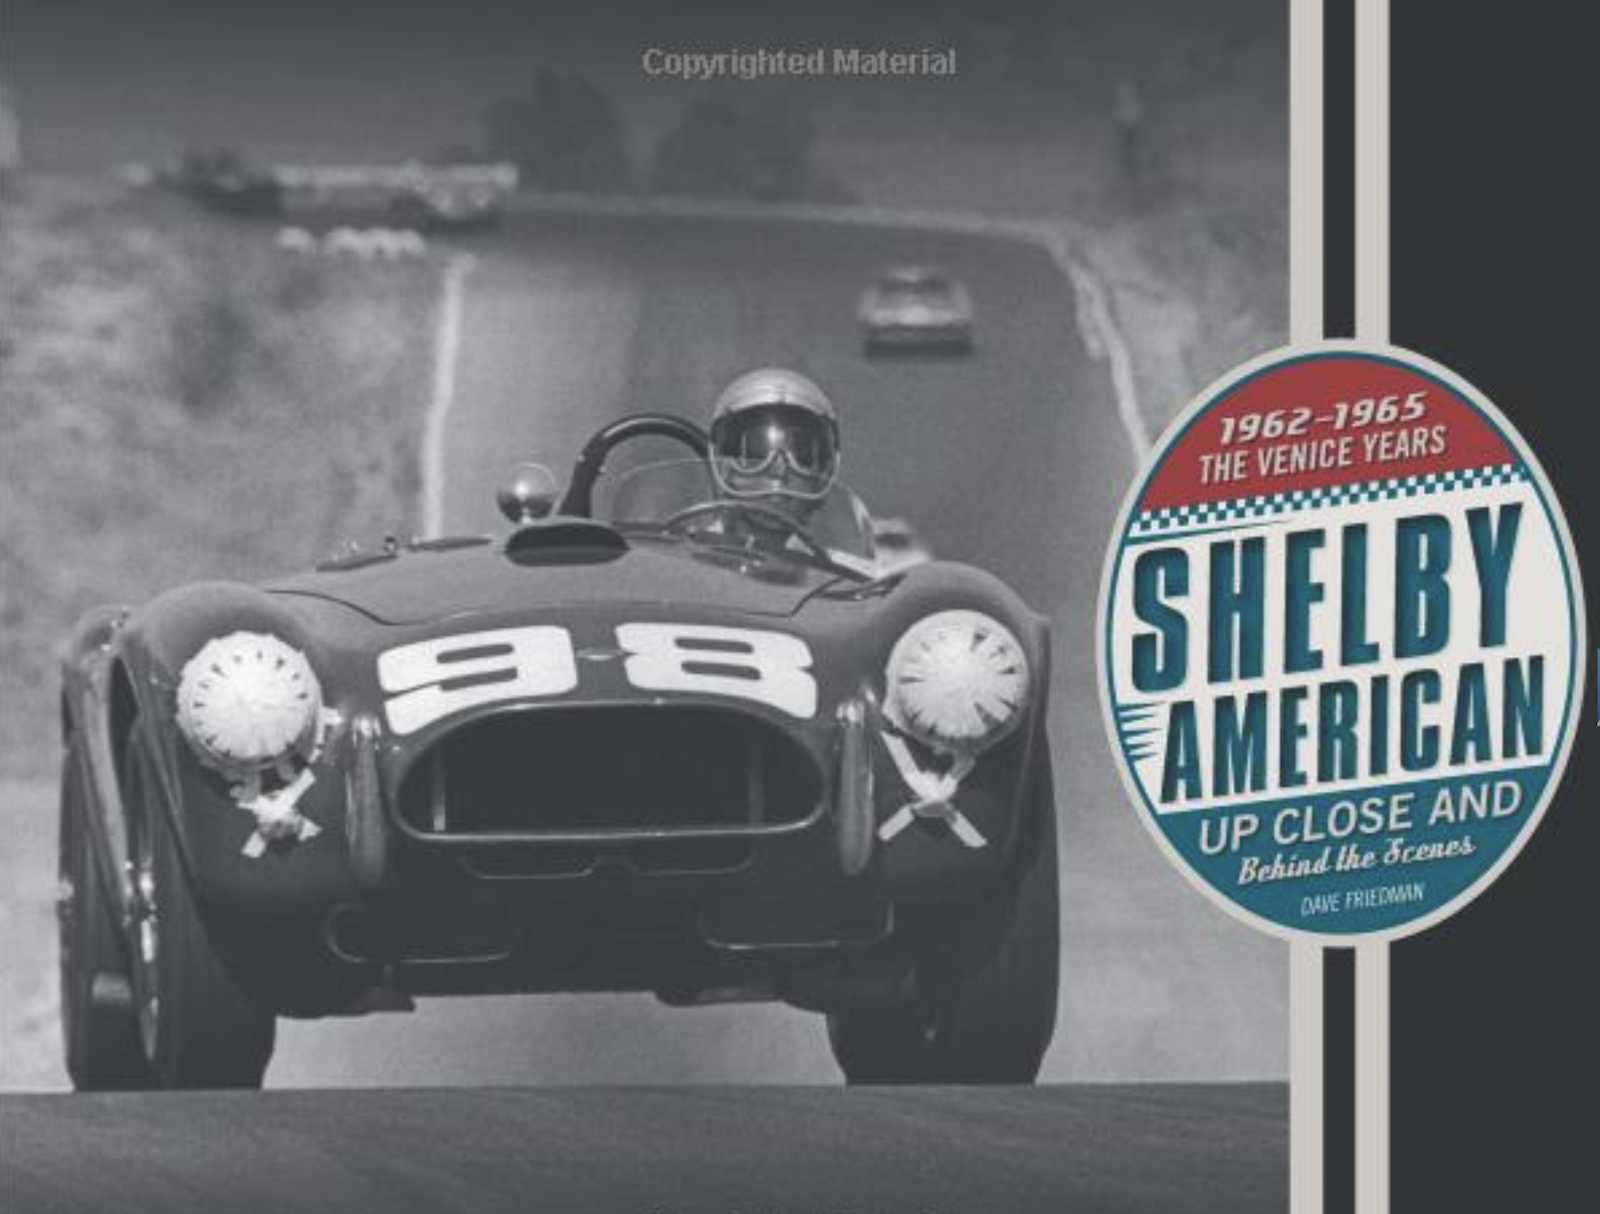 BOOK REVIEW: Shelby American Up Close and Behind the Scenes